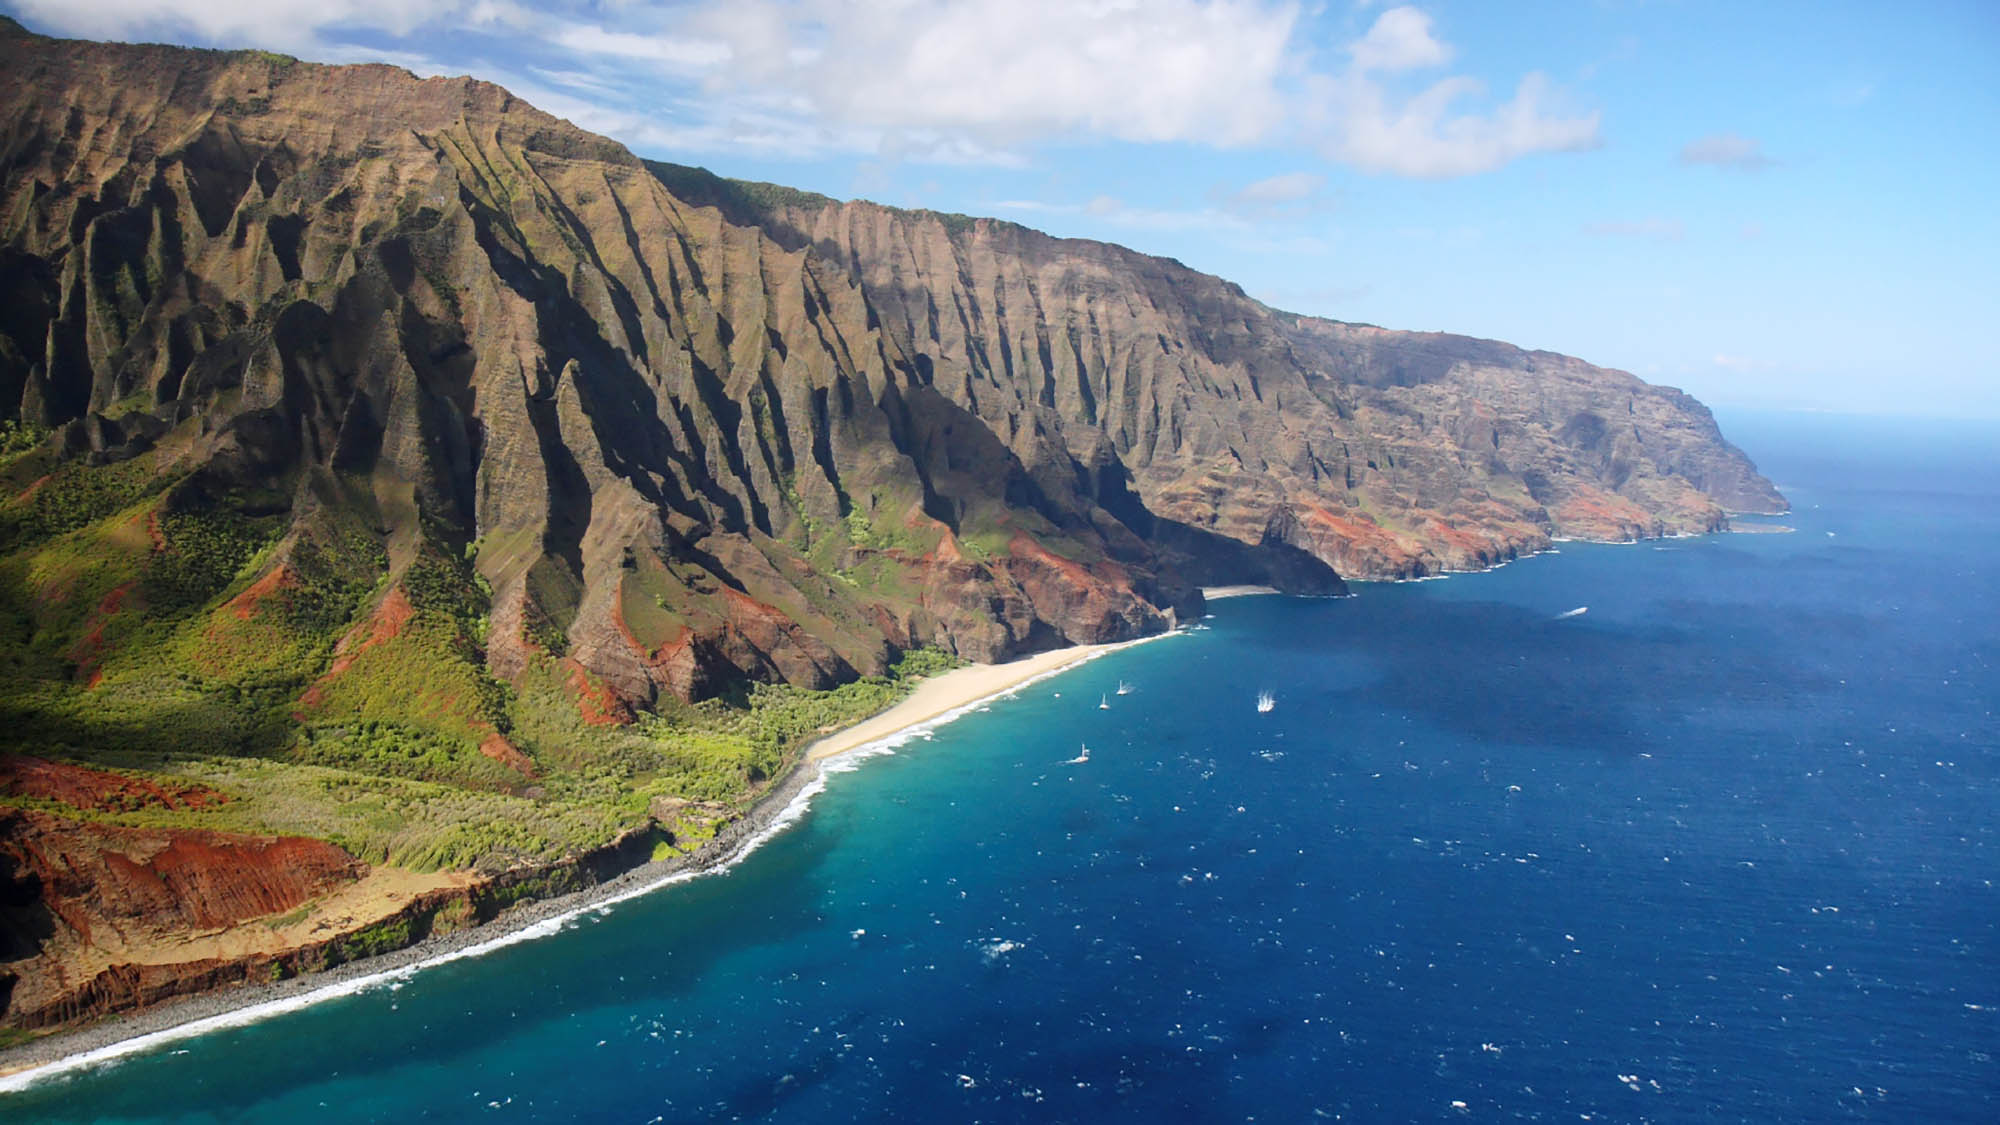 <p><span><span><span><span><span><span>Stretching along the northwest shore of Kauai, the NaPali Coast in Hawaii is a gorgeous blend of towering sea cliffs, green valleys, and pristine beaches. The rough terrain appears much like it did centuries ago when Hawaiian villages prospered.</span></span></span></span></span></span></p>  <p><span><span><span><span><span><span>The Kalalau Trail, a challenging 11-mile trek, unveils panoramic views of this coastal wonder. Verdant valleys, like Hanakapiai and Kalalau, punctuate the coastline, providing sheltered havens for diverse flora and fauna. Hidden sea caves and cascading waterfalls add an enchanting touch to the already surreal landscape.</span></span></span></span></span></span></p>  <p><span><span><span><span><span><span>One of the best ways to experience the NaPali Coast is by boat, allowing visitors to witness the sea cliffs rising dramatically from the ocean, revealing hidden valleys inaccessible by land. As the sun sets, the cliffs glow with hues of amber and gold, casting an aura over the rugged coastline. Visitors can see this 17-mile coastline by boat or by air. There are also kayaking trips that allow visitors to see the cliffs up close.</span></span></span></span></span></span></p>